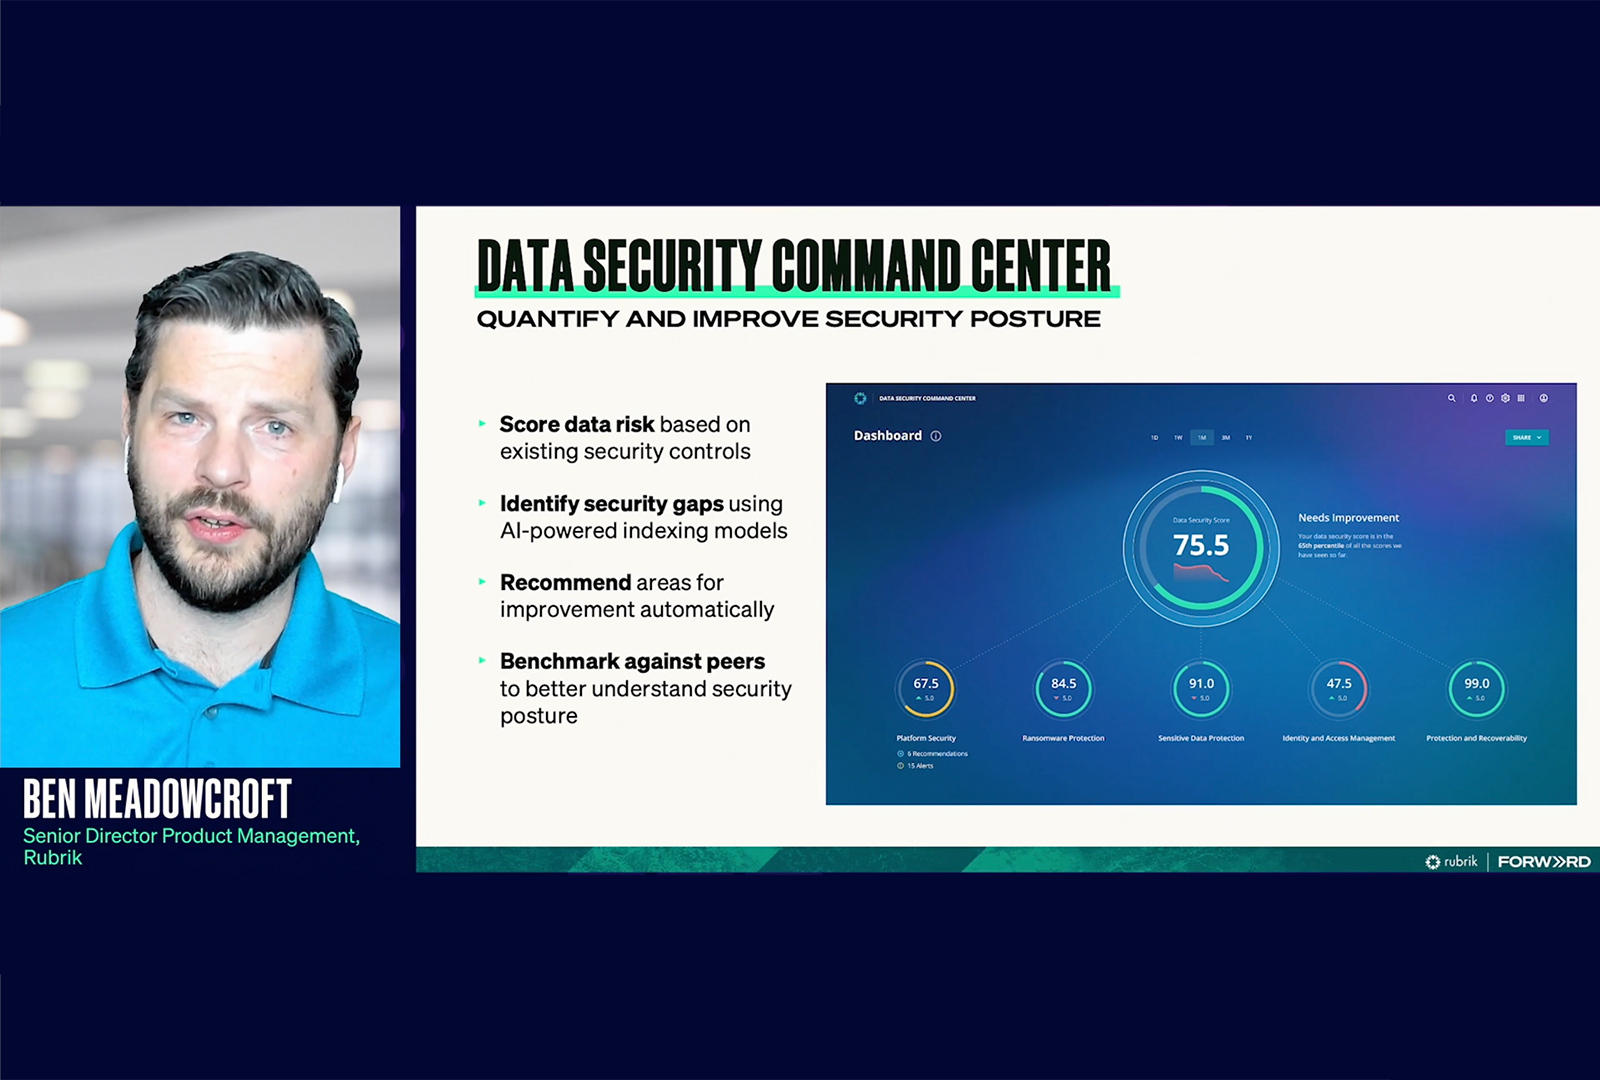 Five Cool Rubrik Capabilities to Further Enable Your Security Team